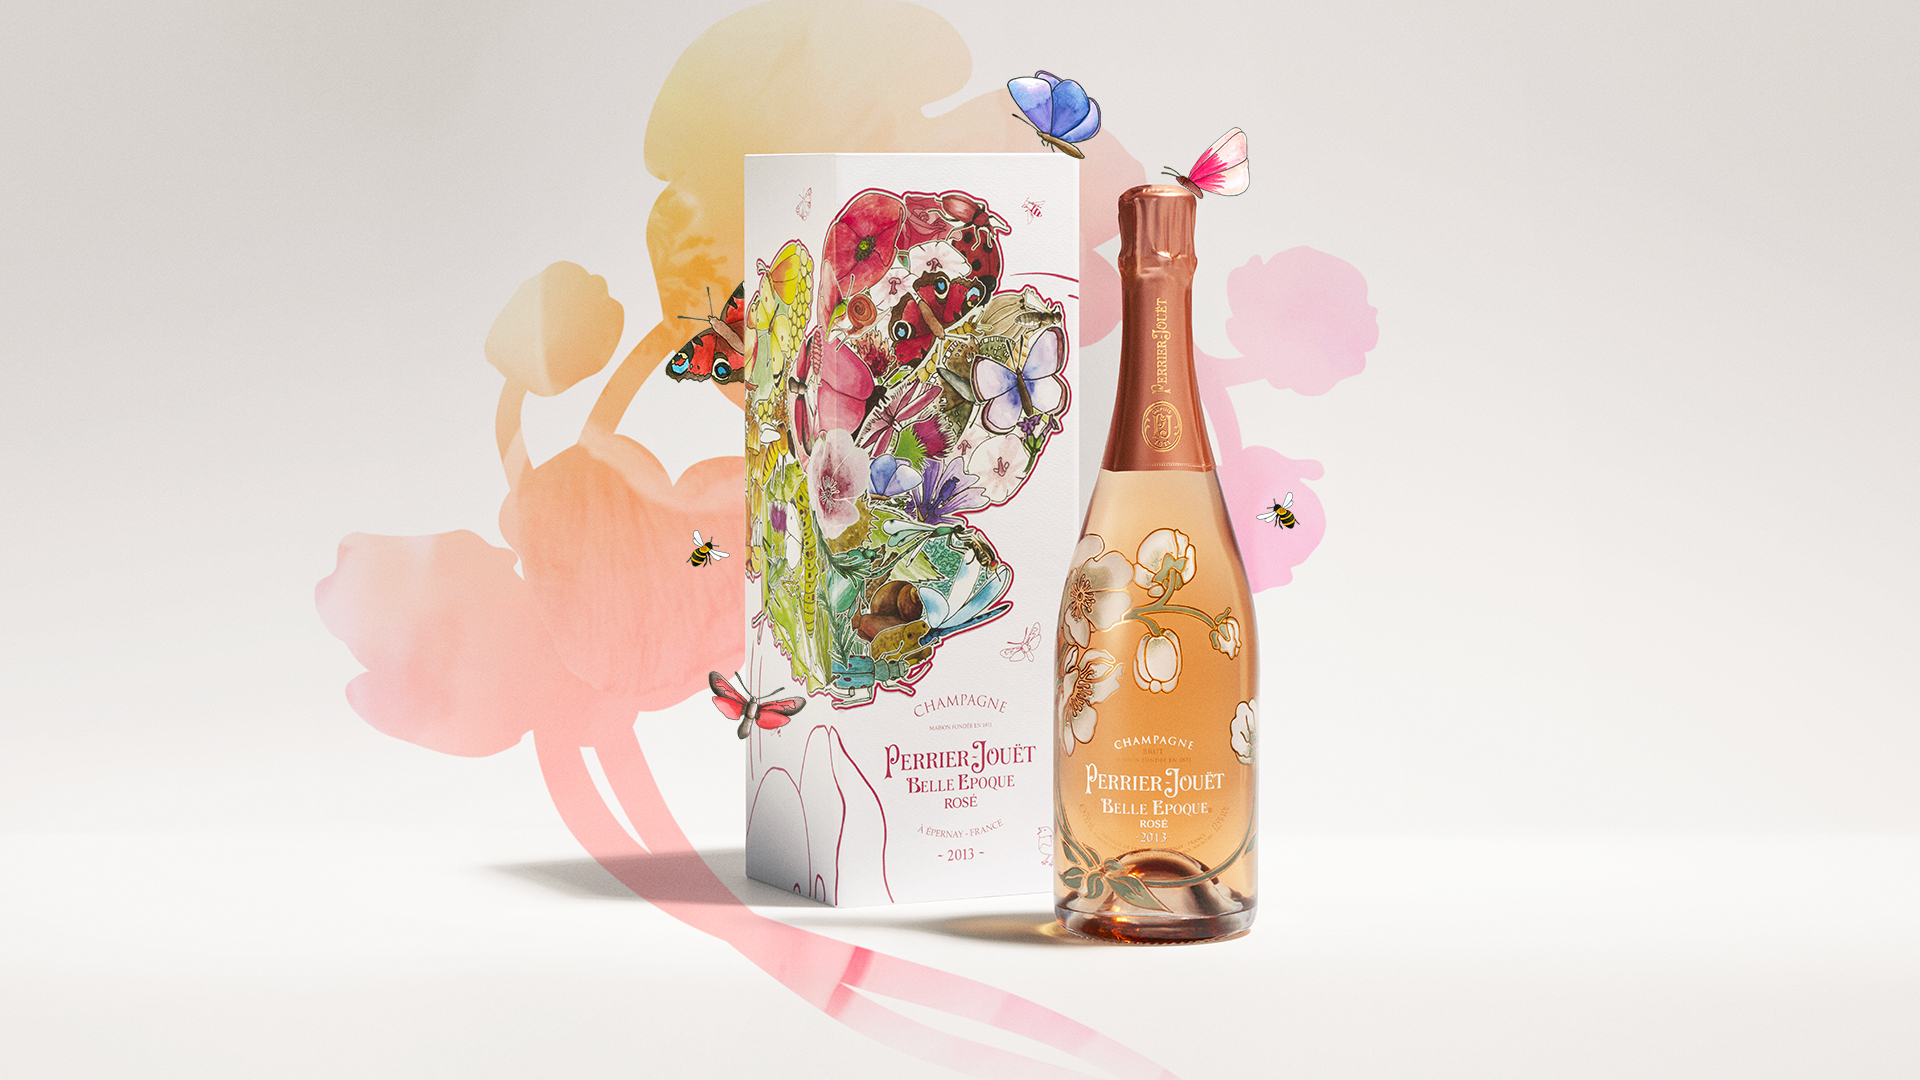 Perrier-Jouët’s Belle Epoque Rosé 2013 Limited Edition Gift Box for Valentine's Day